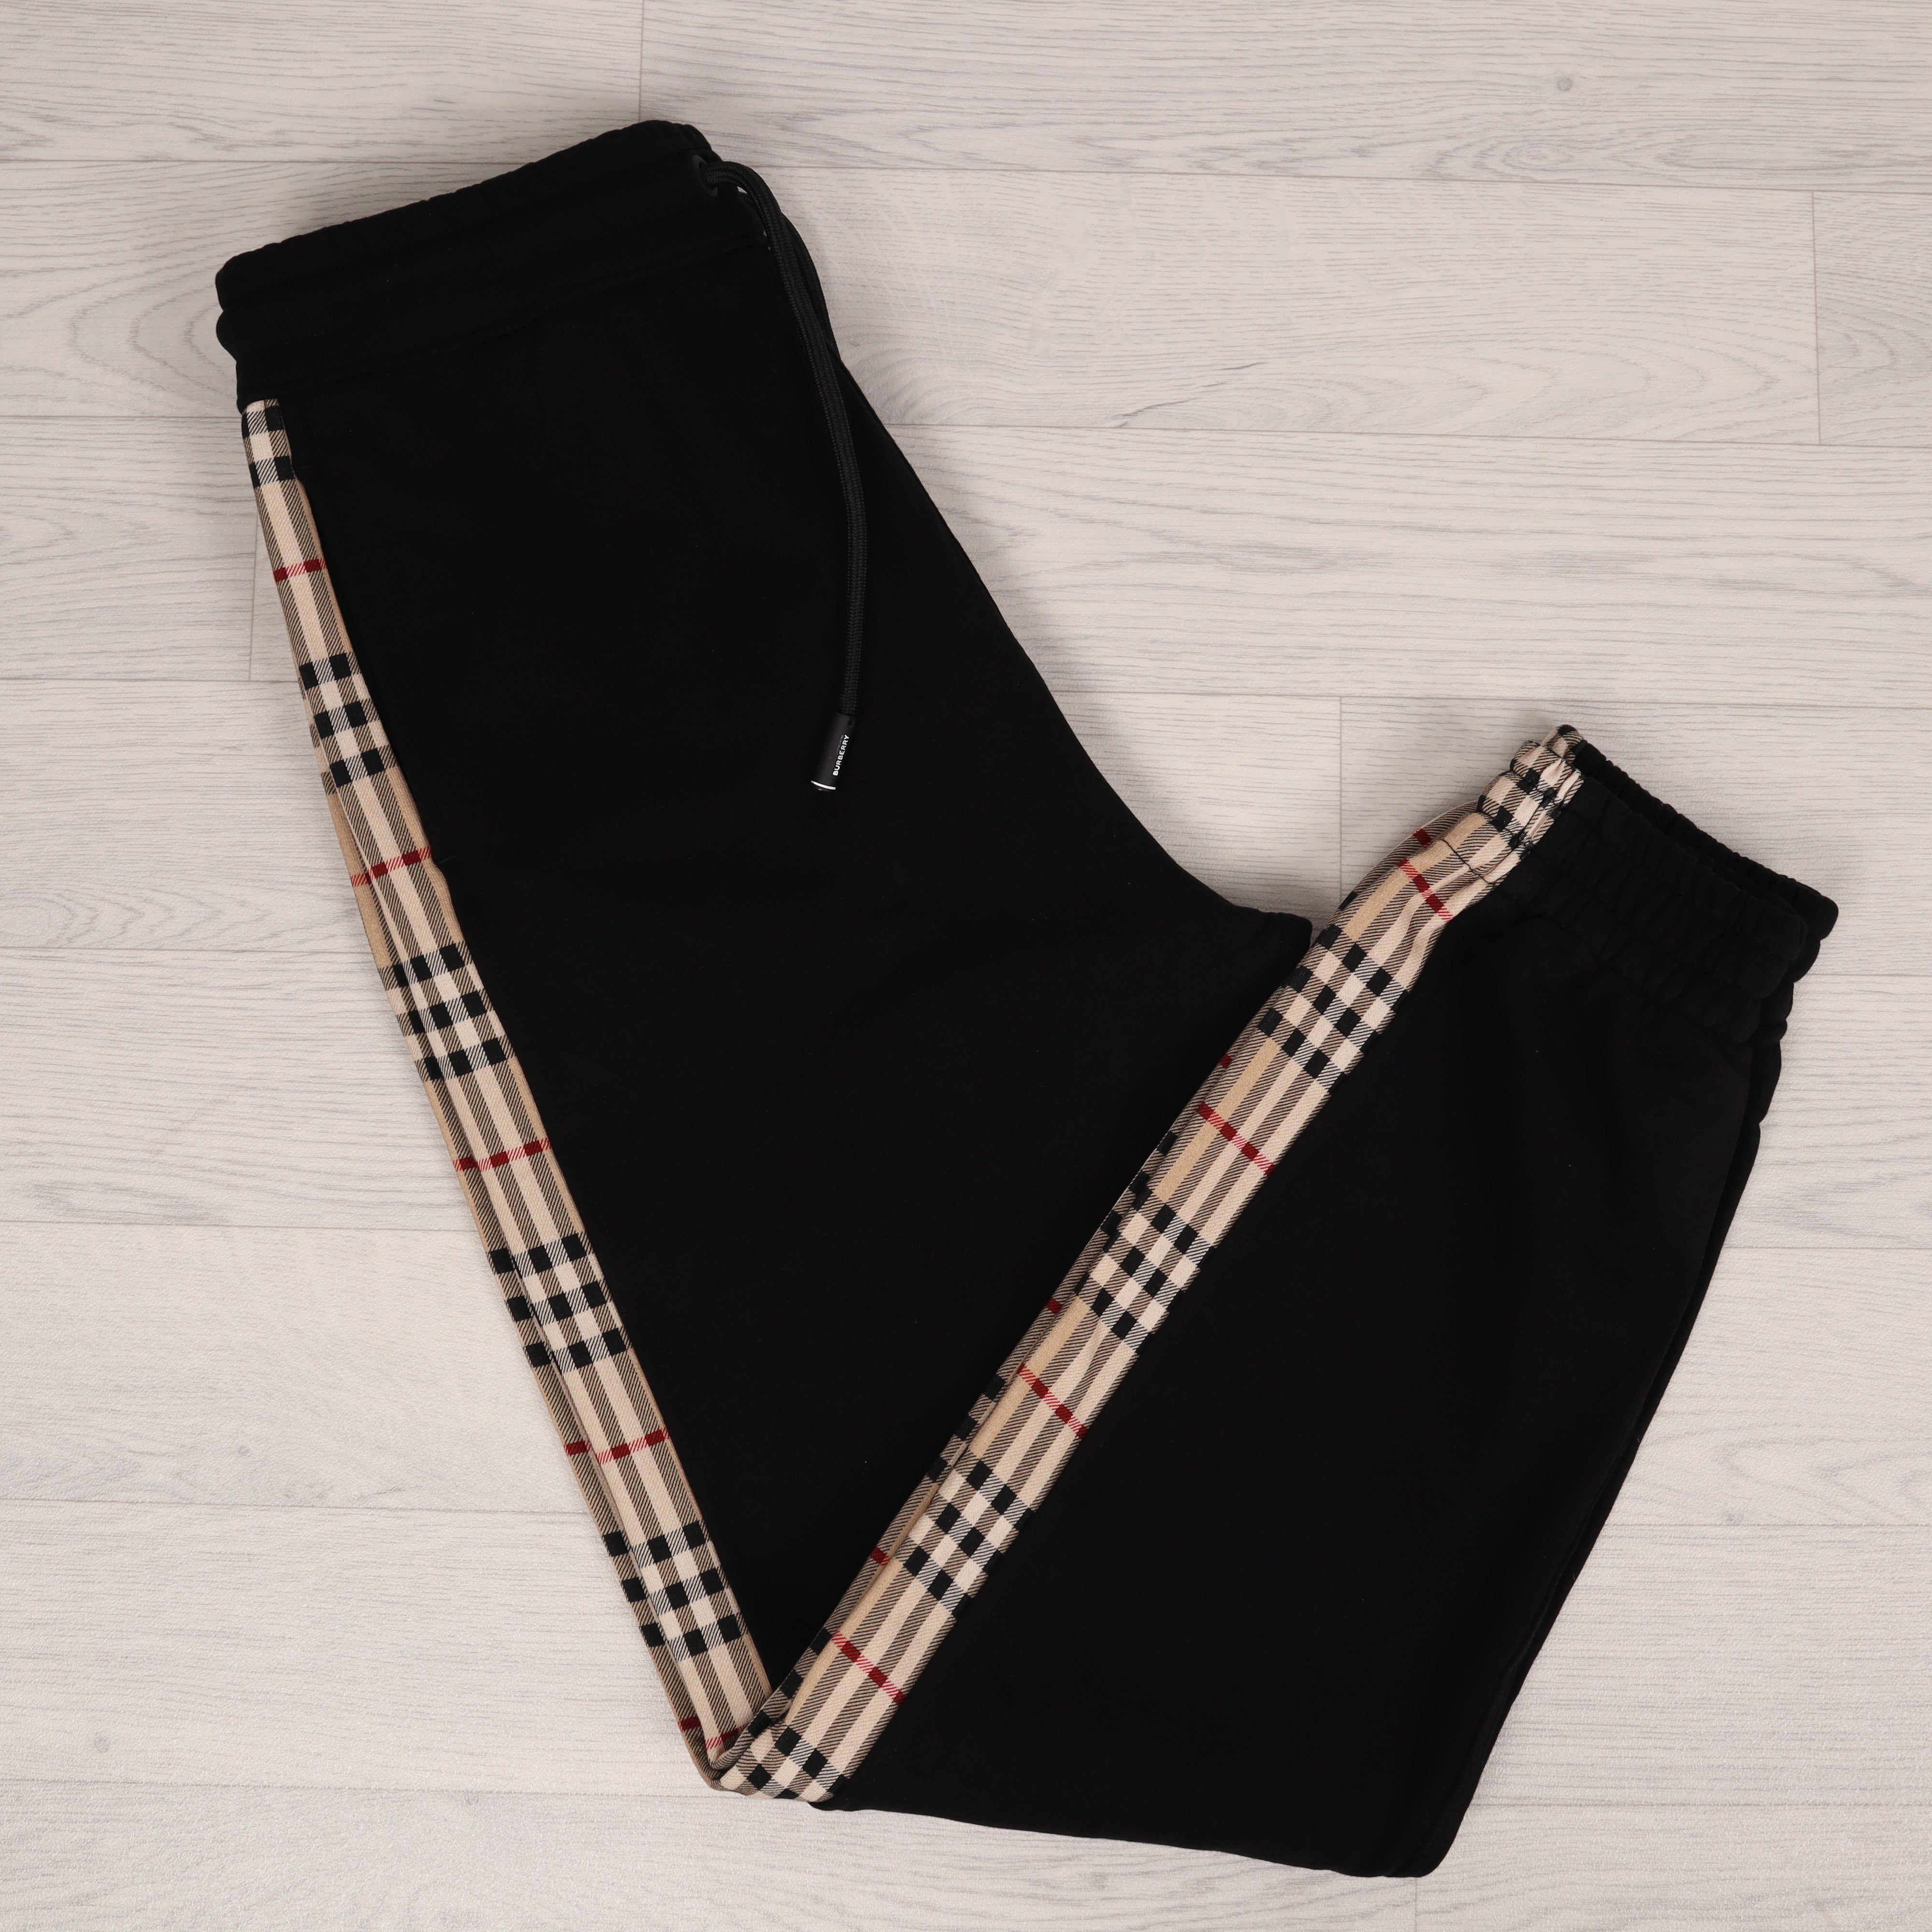 Black Chequered Track Pants.